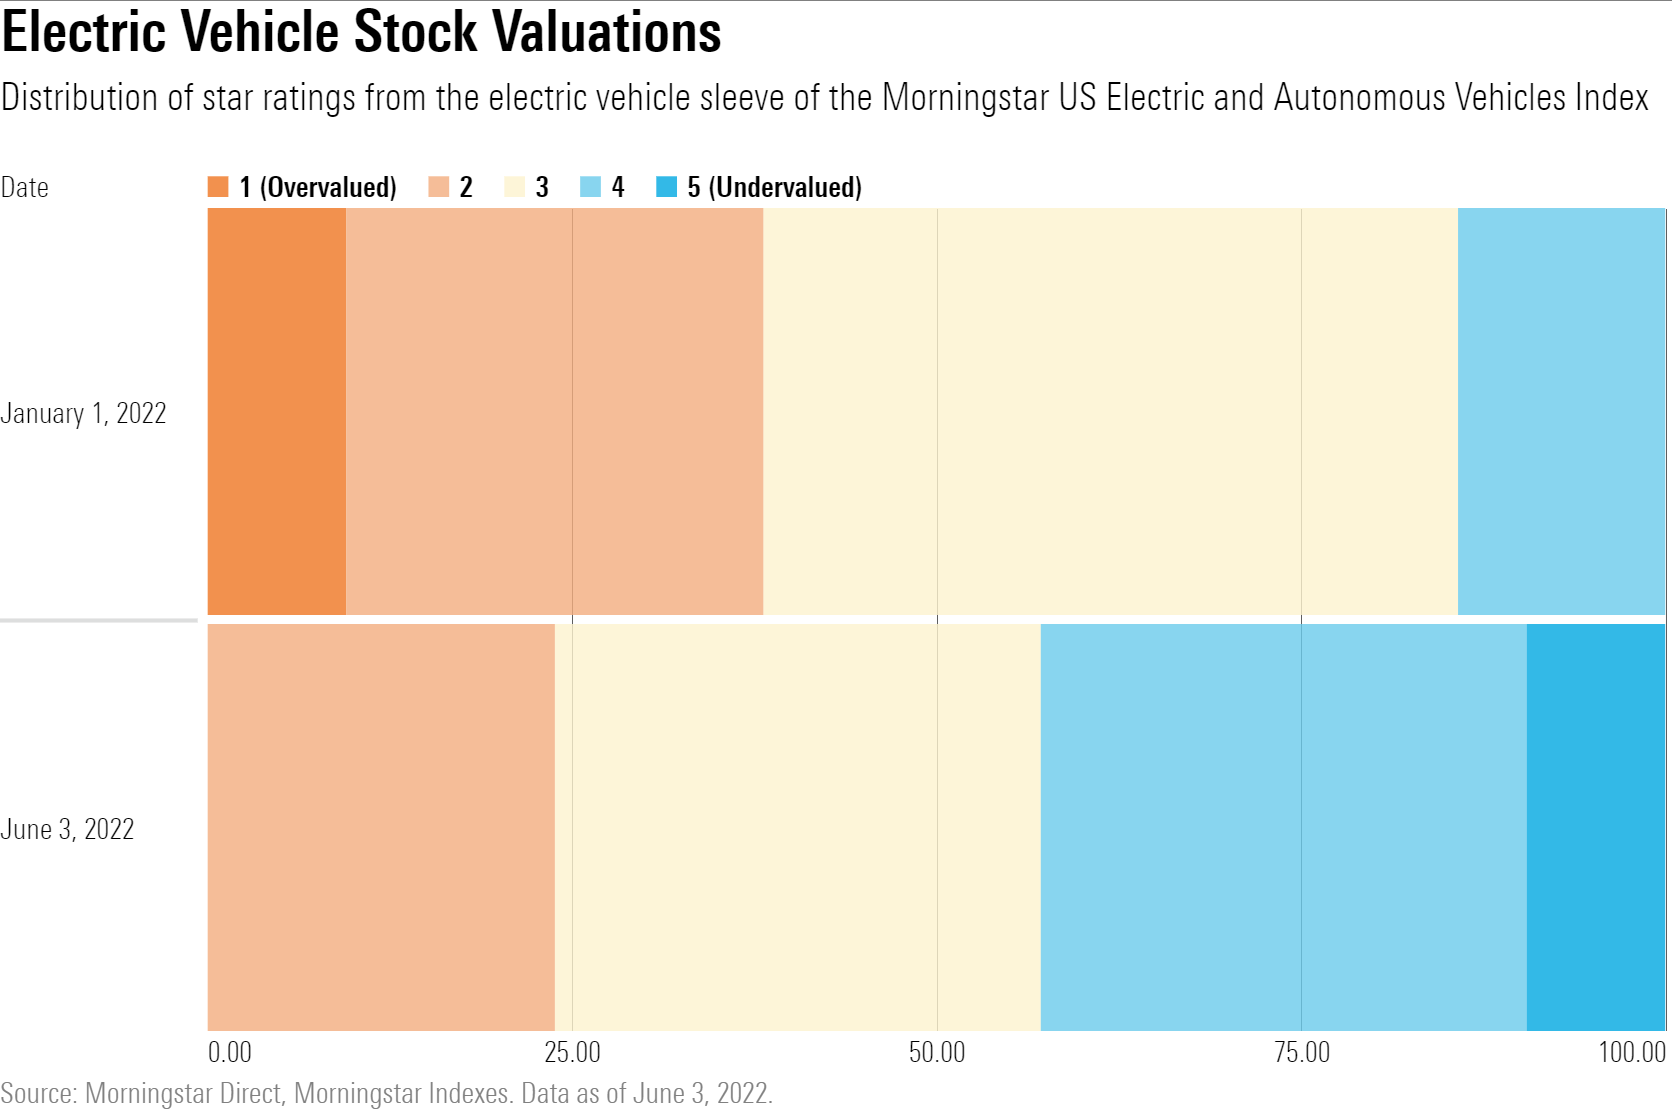 Distribution of star ratings from the electric vehicle sleeve of the Morningstar US Electric and Autonomous Vehicles Index